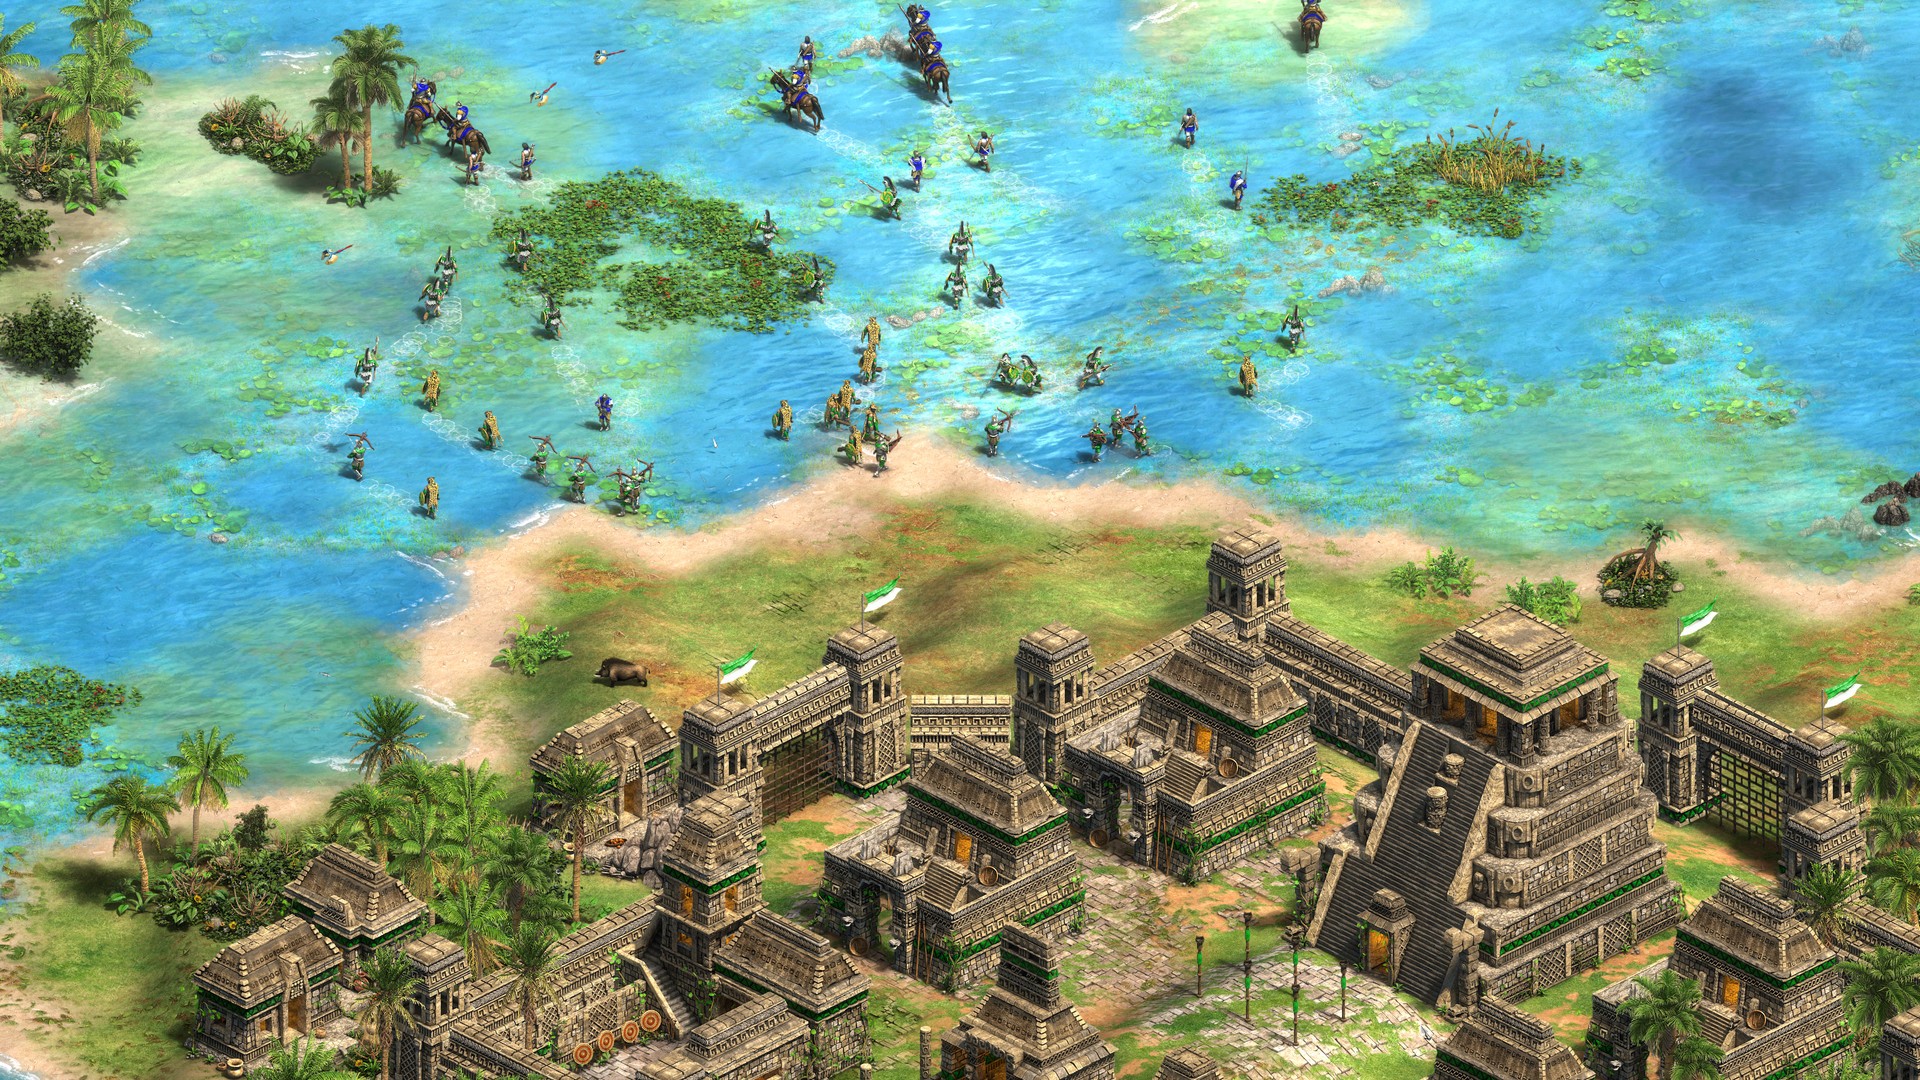 Age of Empires: Definitive Edition official promotional image - MobyGames